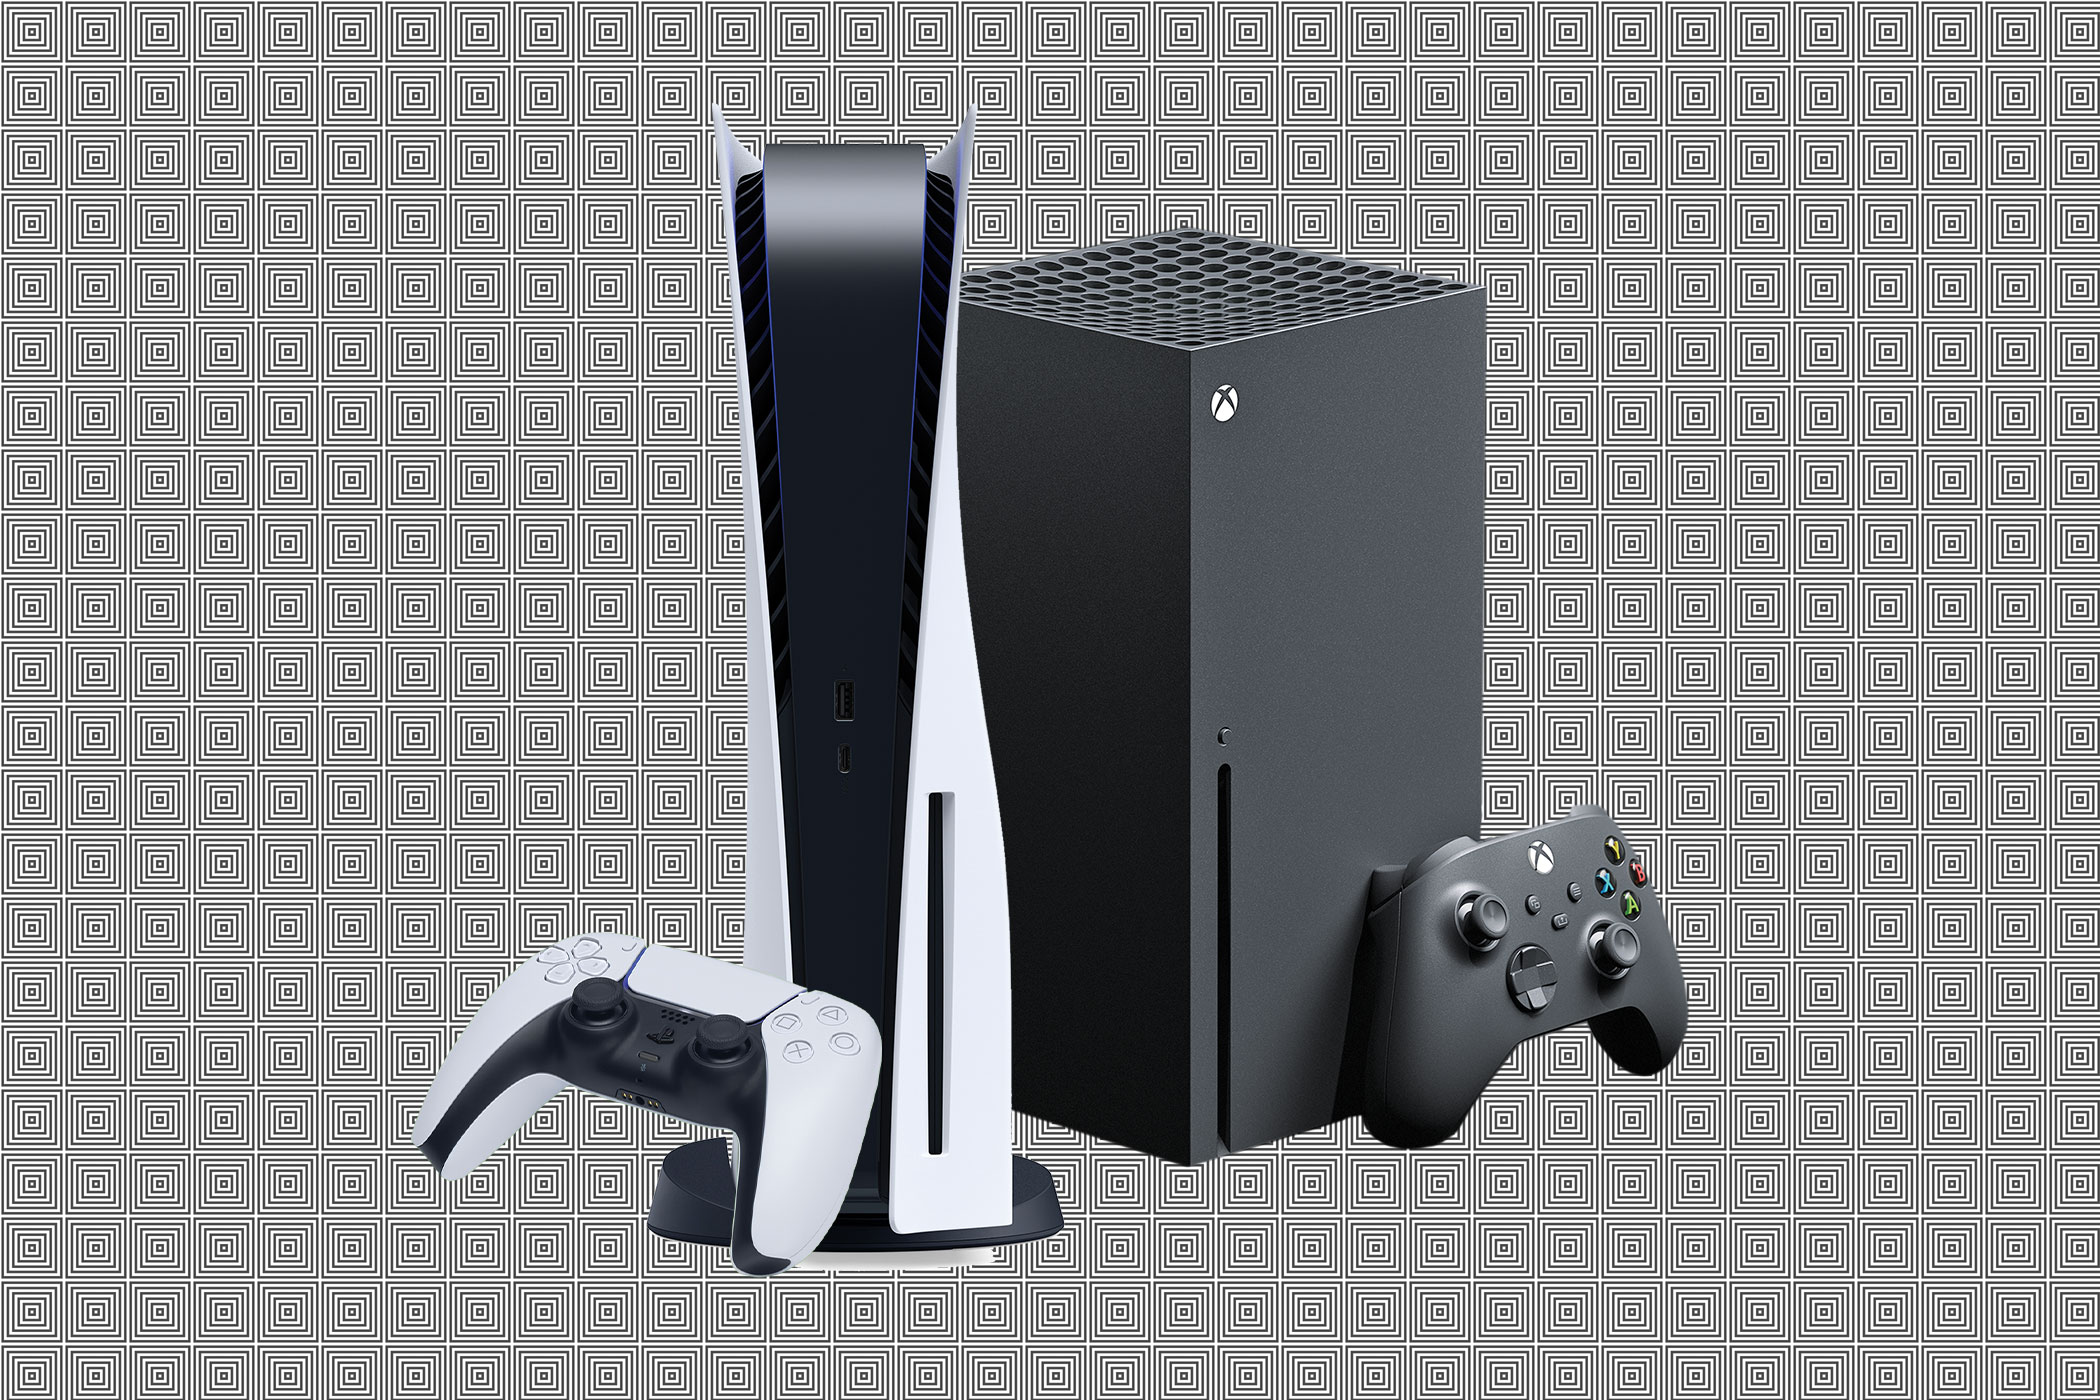 how to set xbox 360 as home console